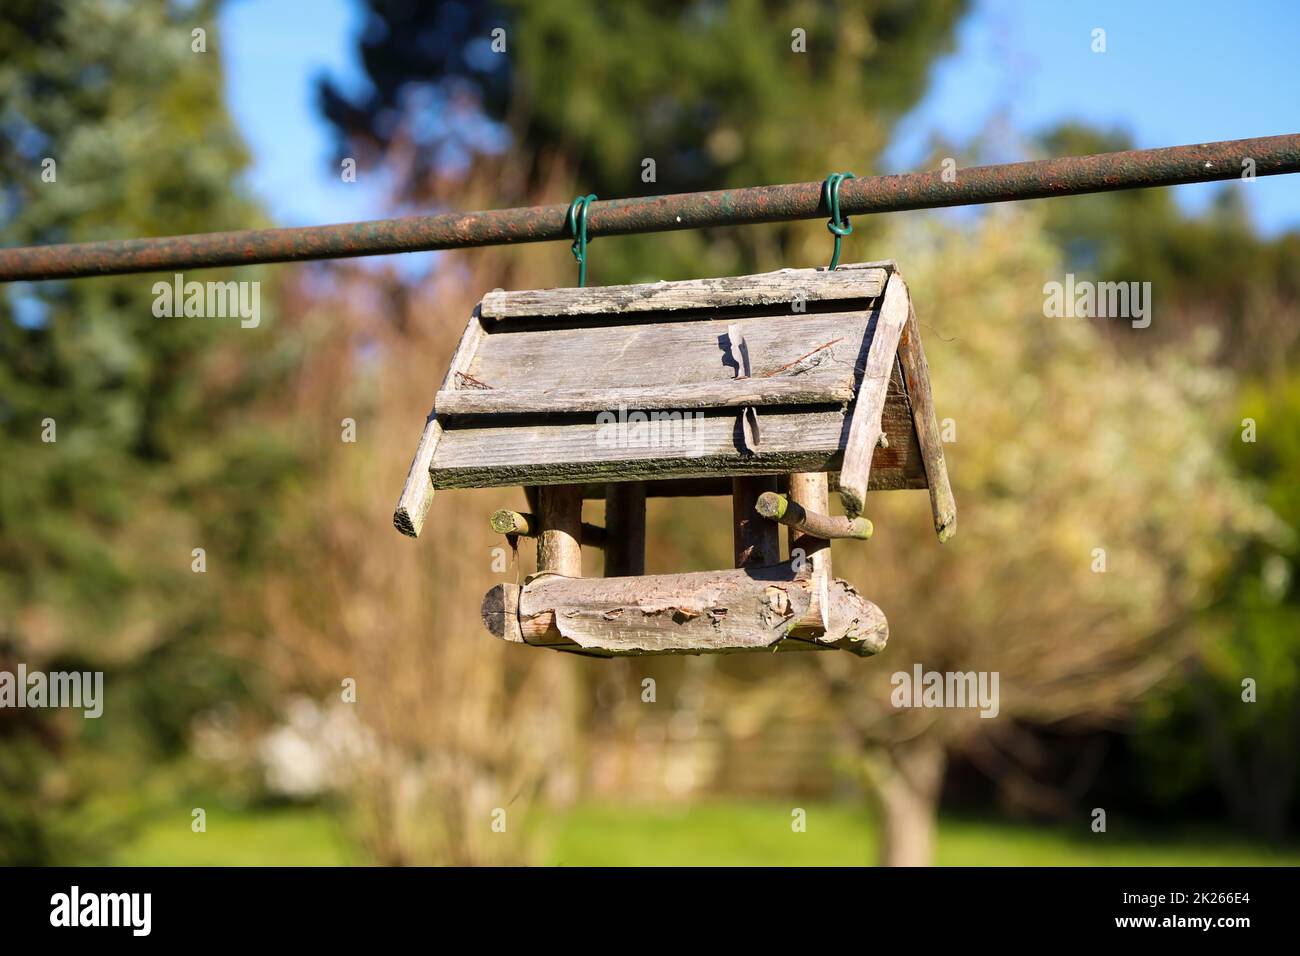 A wooden birdhouse attached to a metal pole. Stock Photo